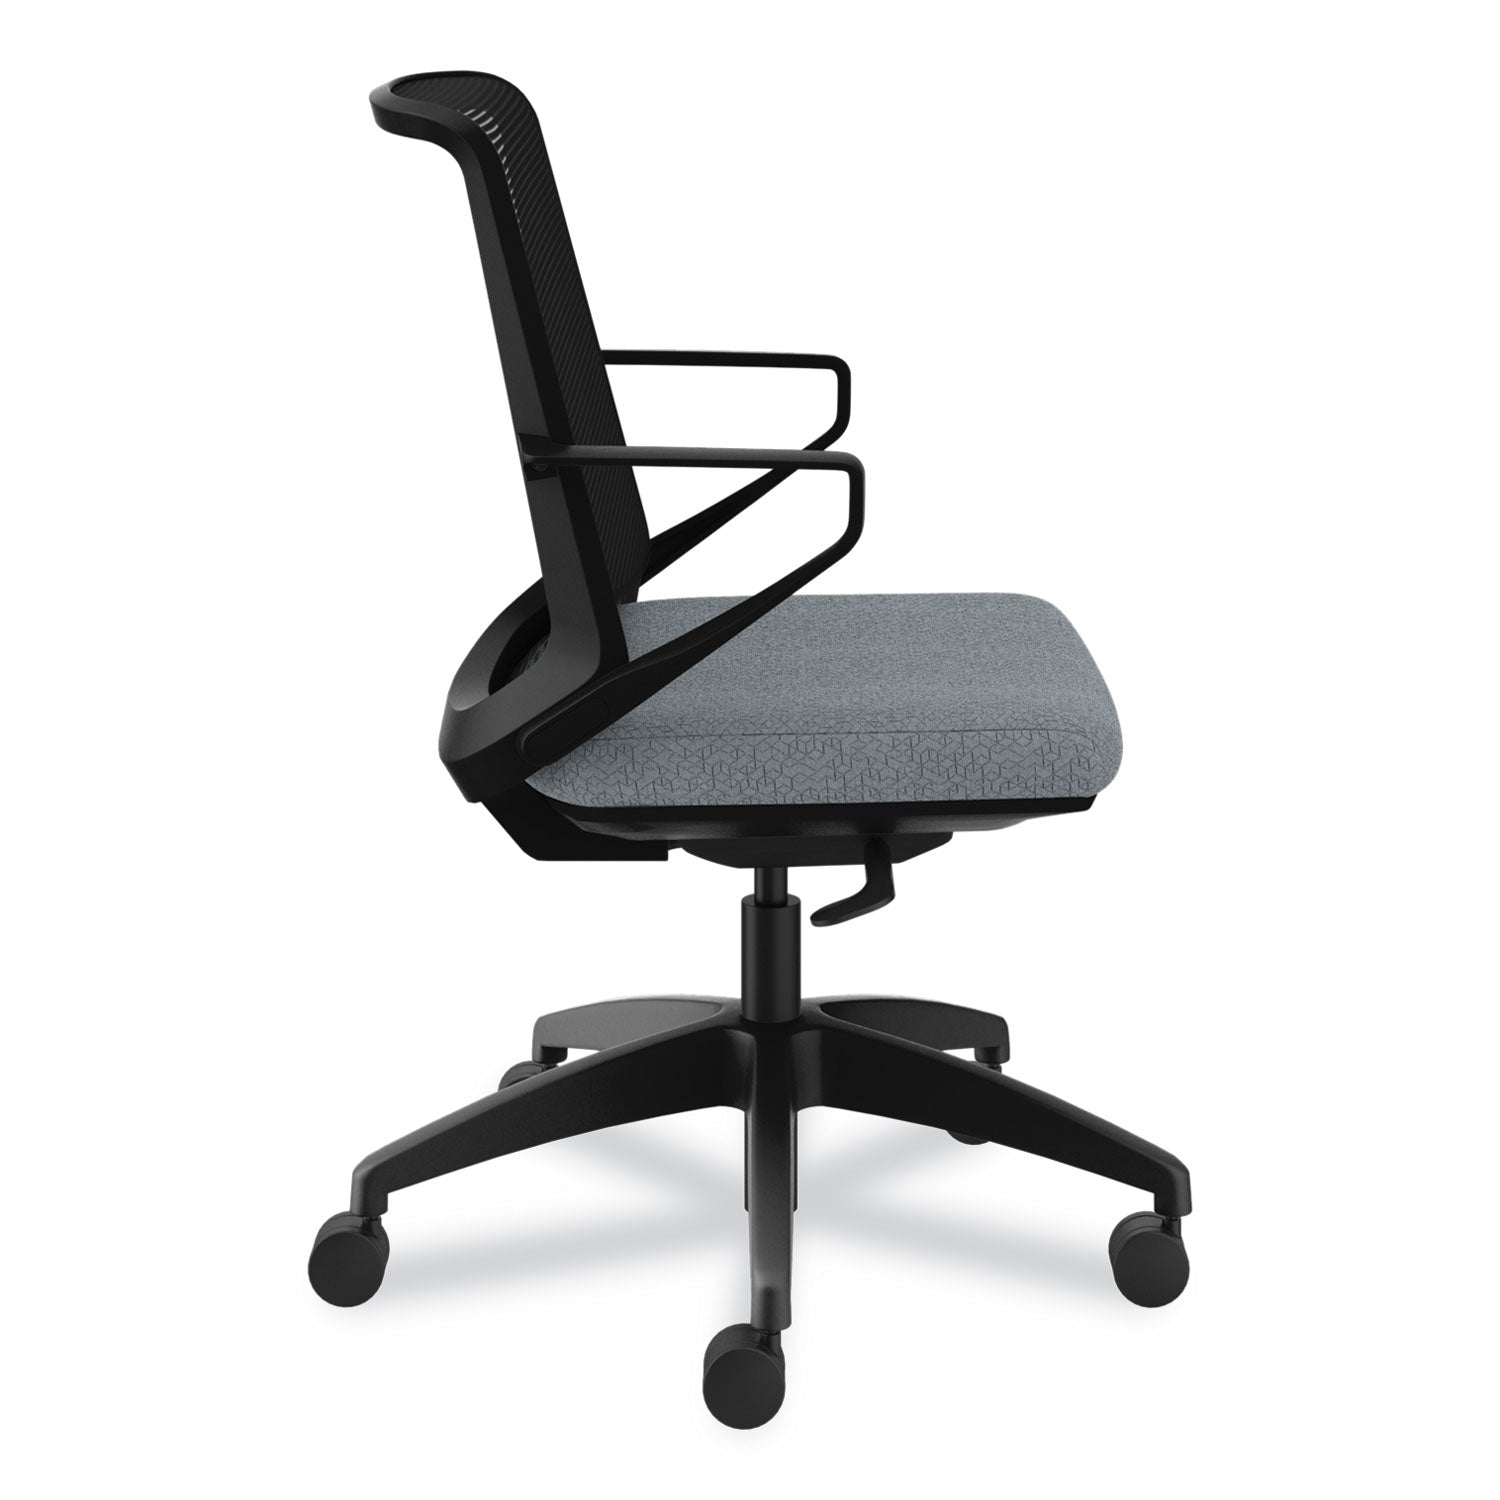 cliq-office-chair-supports-up-to-300-lb-17-to-22-seat-height-basalt-seat-black-back-base-ships-in-7-10-business-days_honclqimapx25t - 6